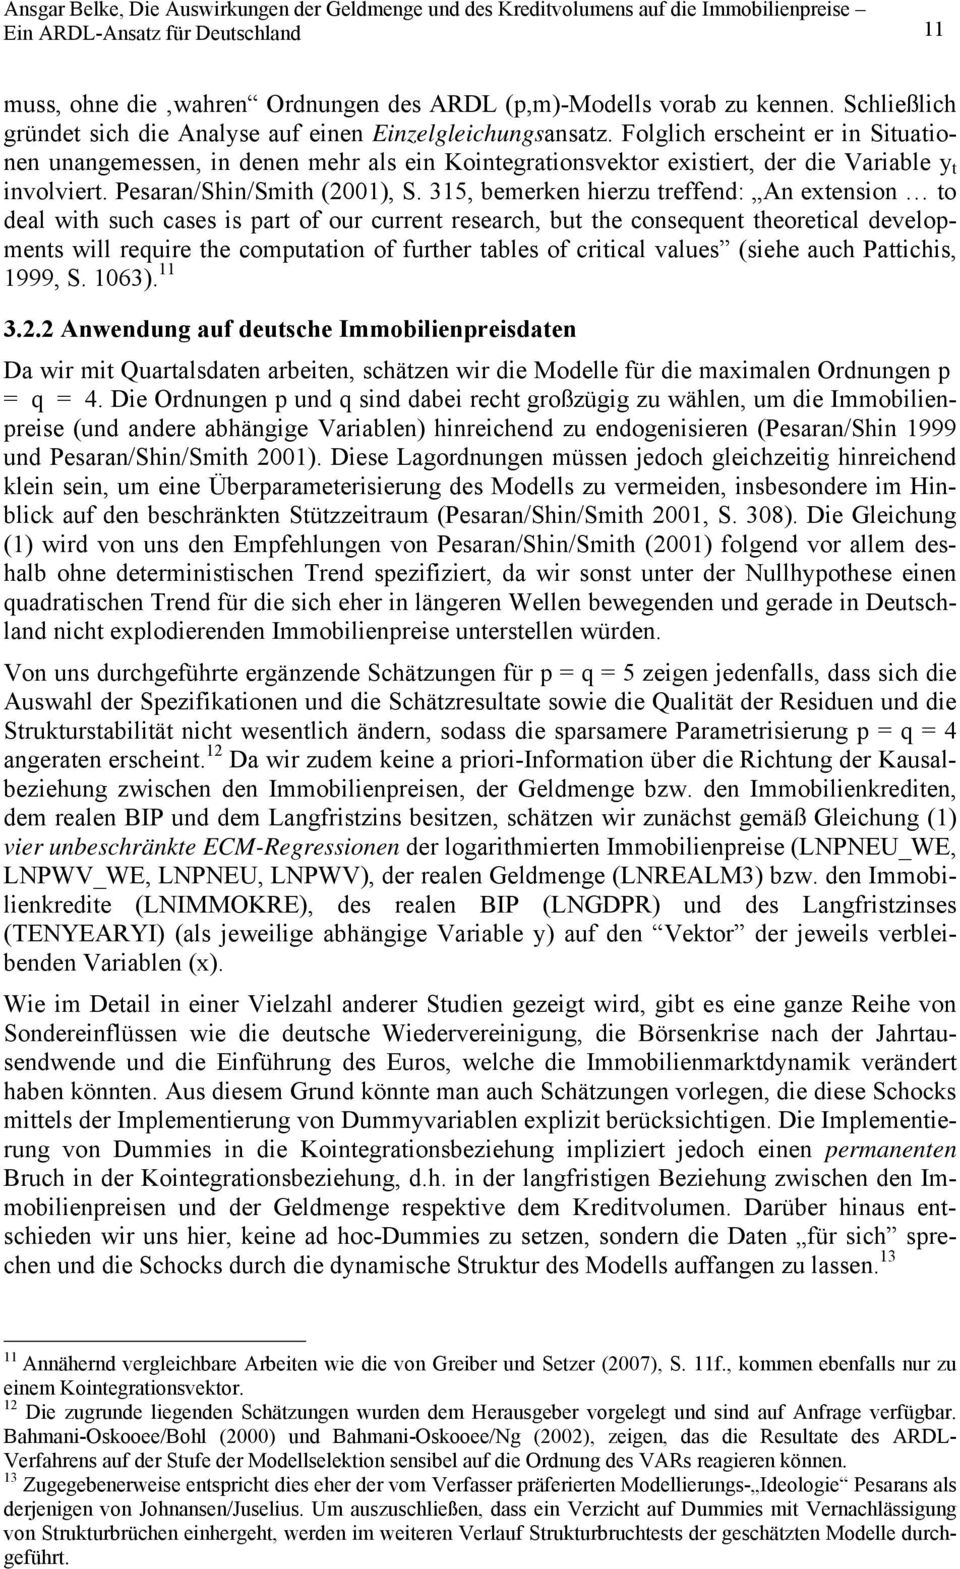 31, bemerken hierzu treffend: An extension to deal with such cases is part of our current research, but the consequent theoretical developments will require the computation of further tables of